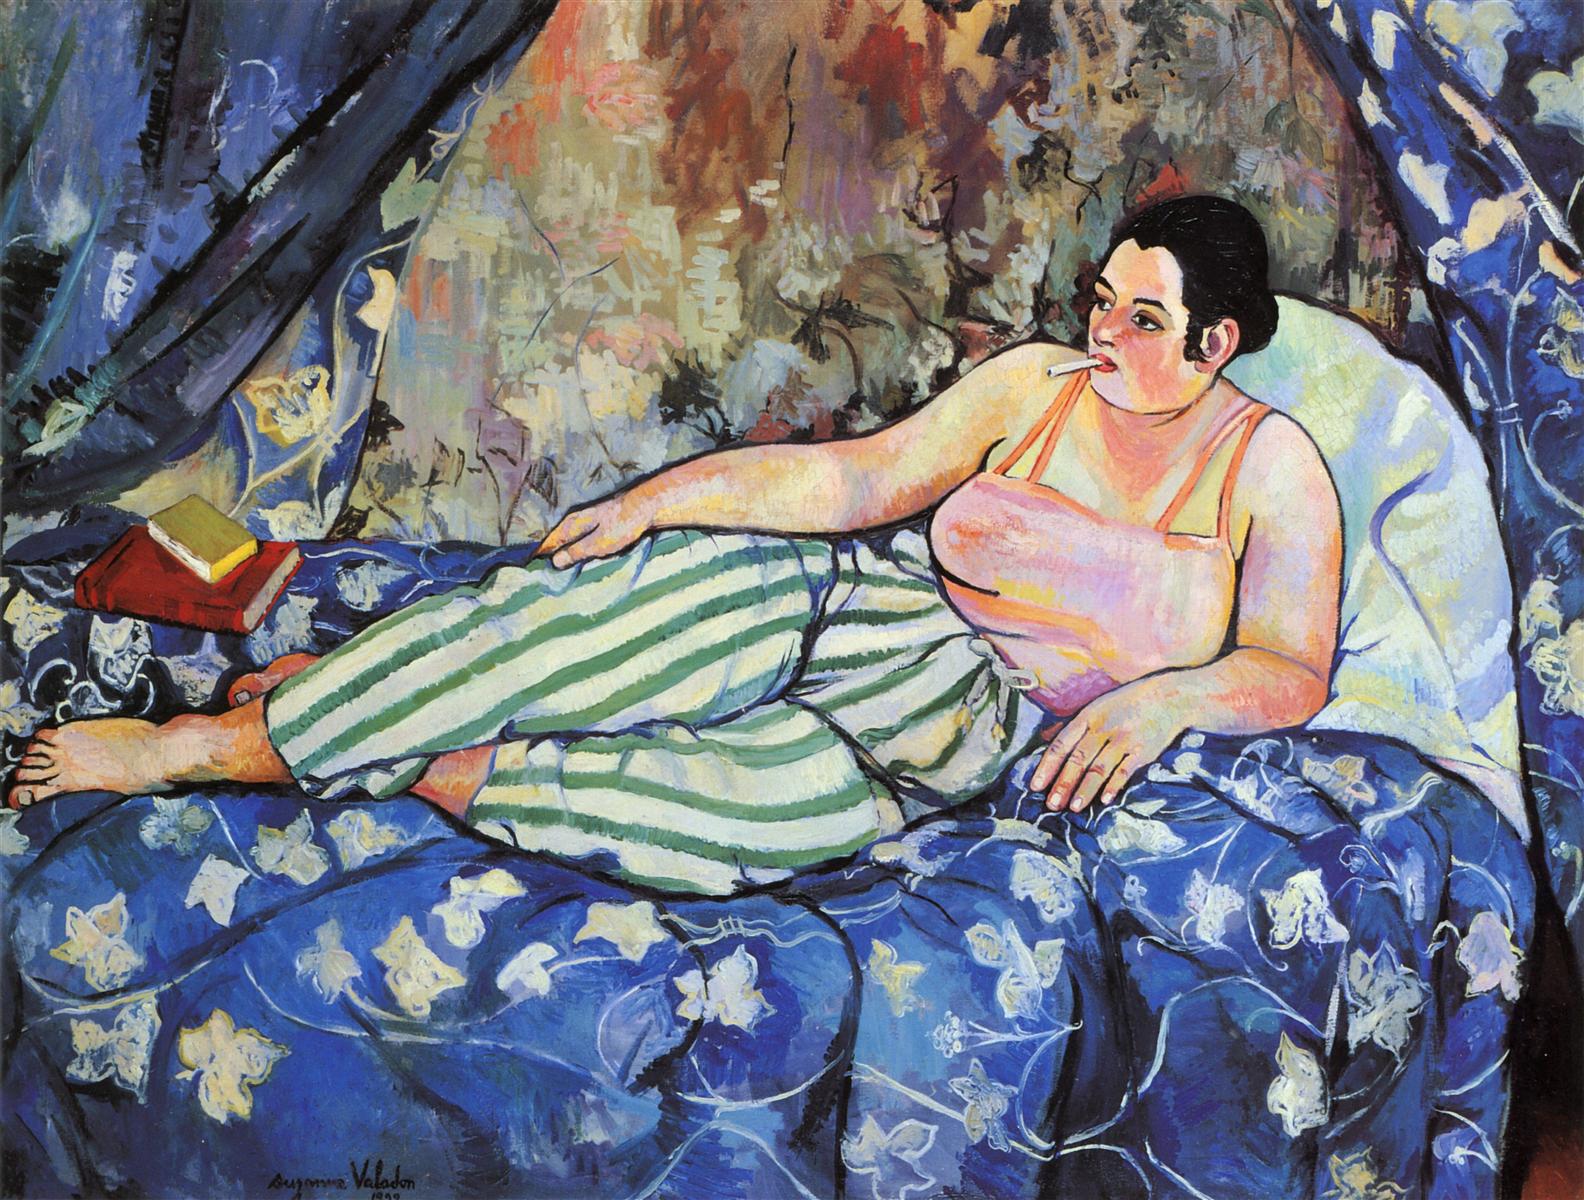 Suzanne Valadon: The Blue Room 1923